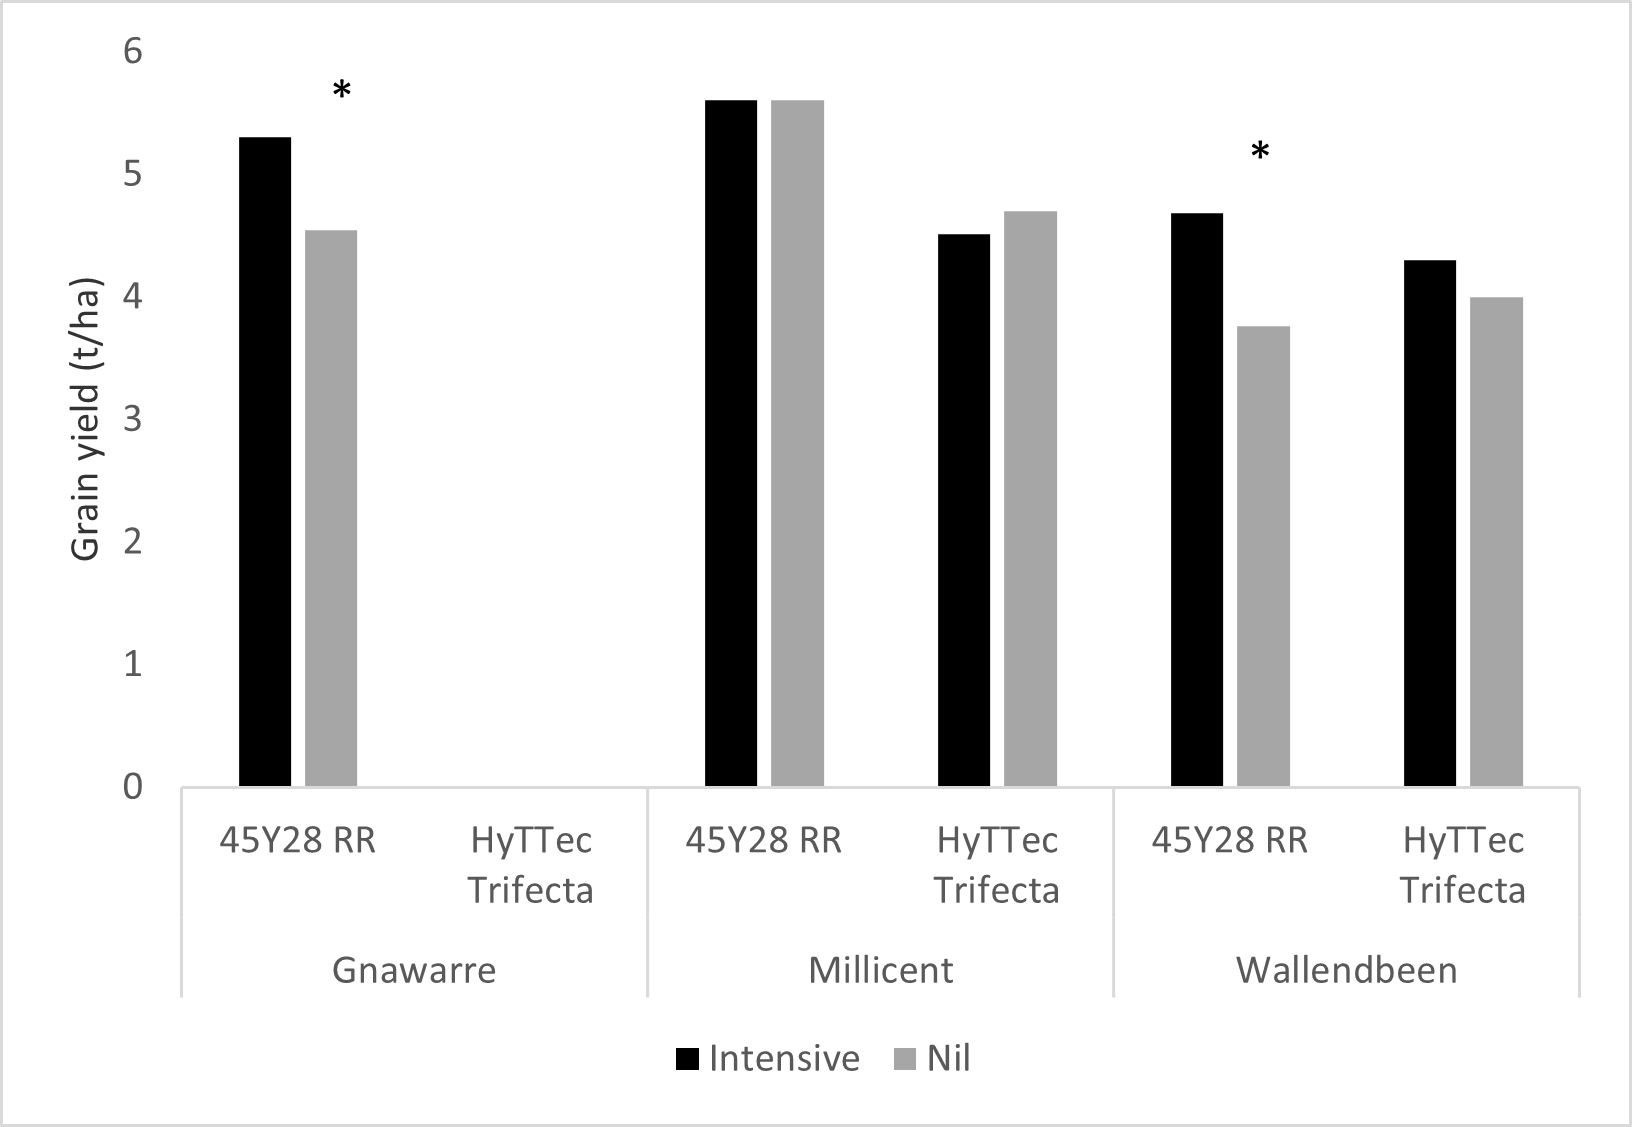 Column graph showing the effect of fungicide program (Intensive versus Nil) on grain yield of 45Y28 RR at Gnarwarre, Millicent and Wallendbeen and on HyTTec Trifecta at Millicent and Wallendbeen in 2021